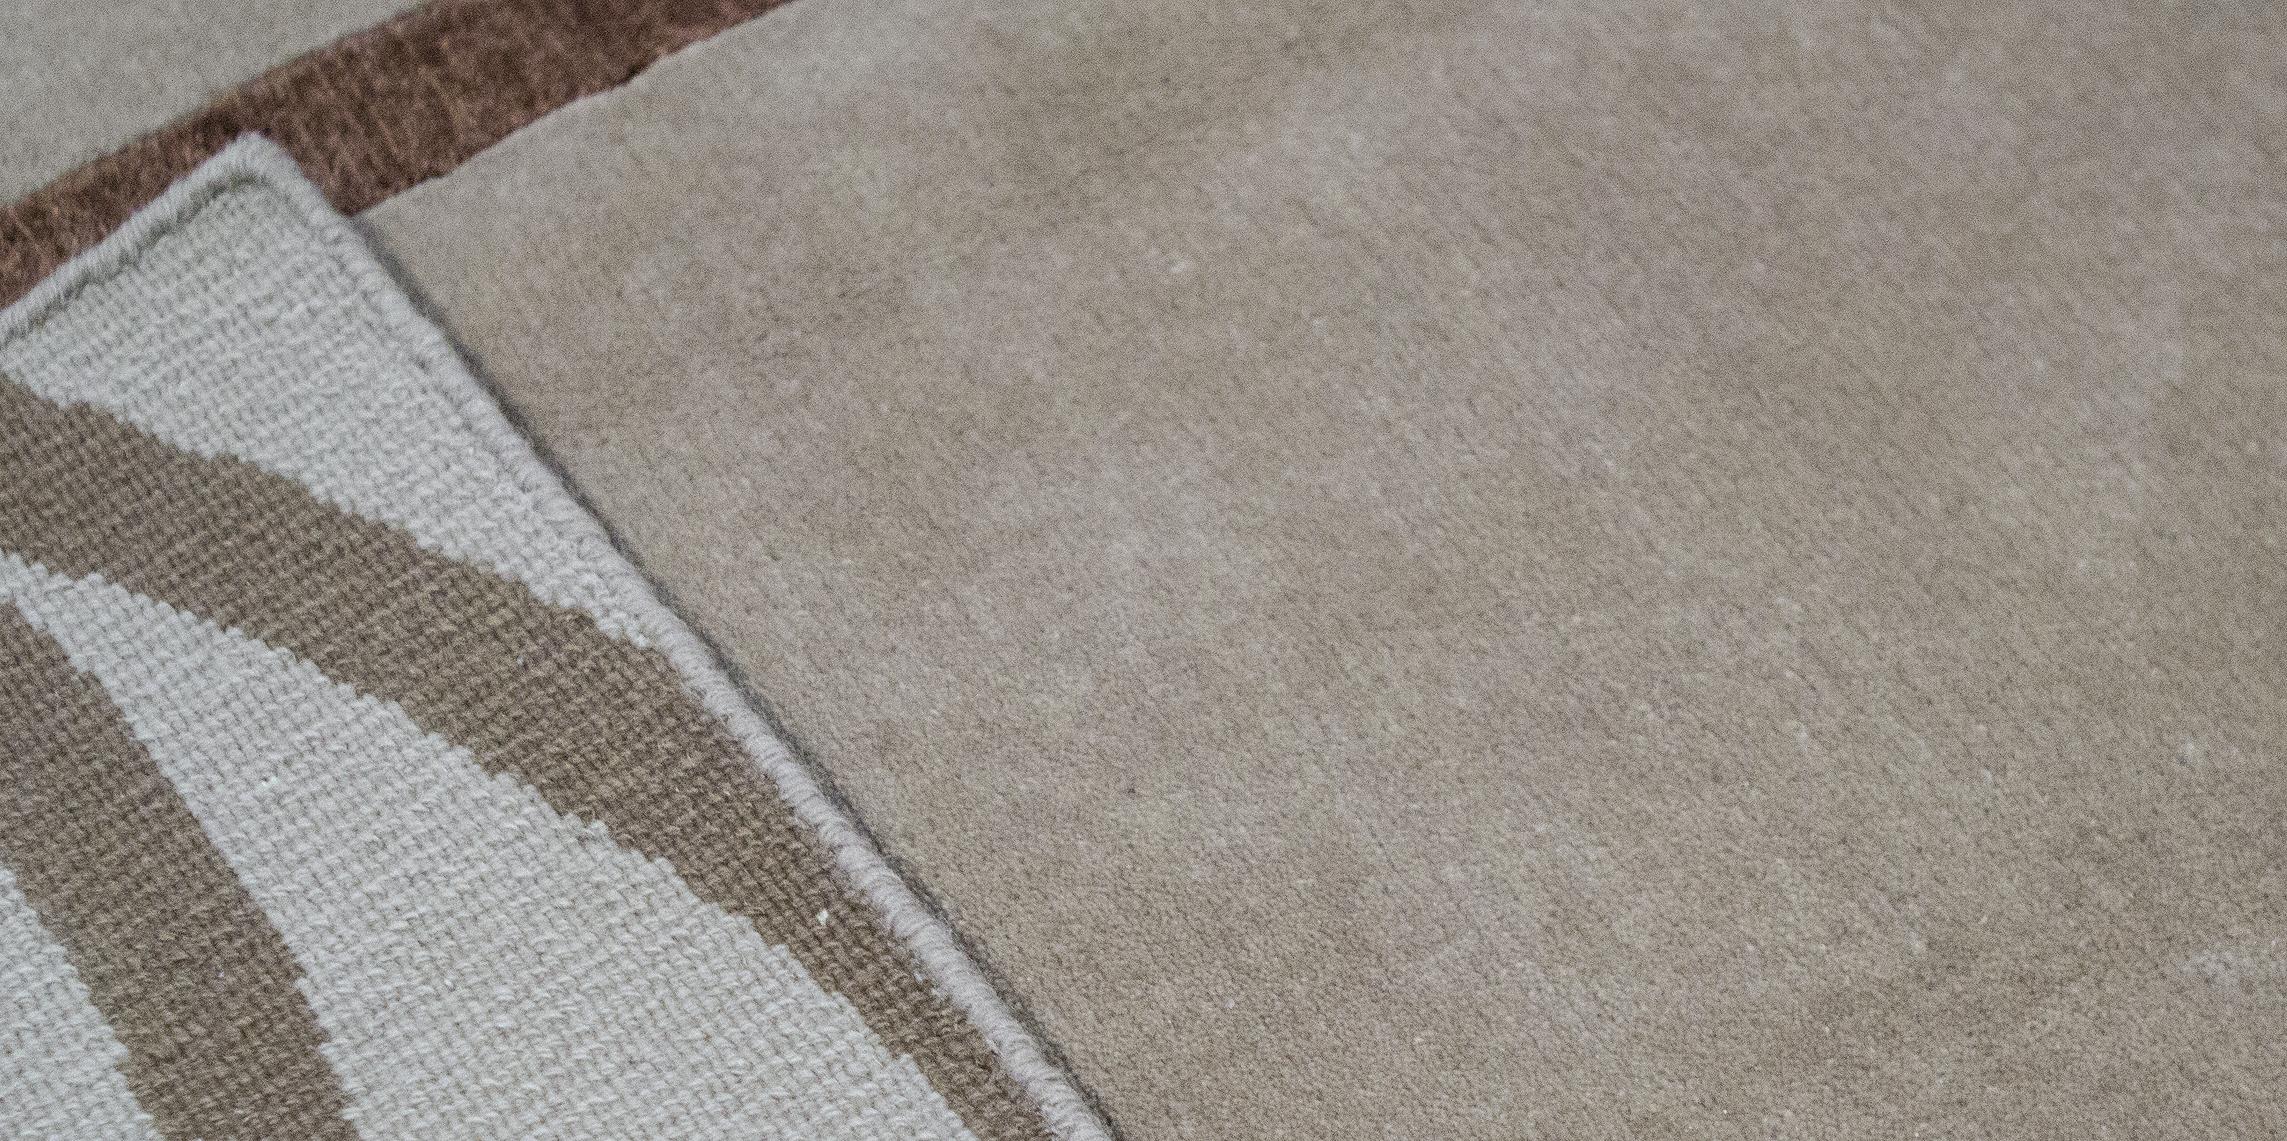 The true style of today is captured in this collection. The combination of wool and viscose in these hand woven rugs, creates a contemporary design, in soft color ways with an indulgent silky look. Measures: 6' x 9'-3